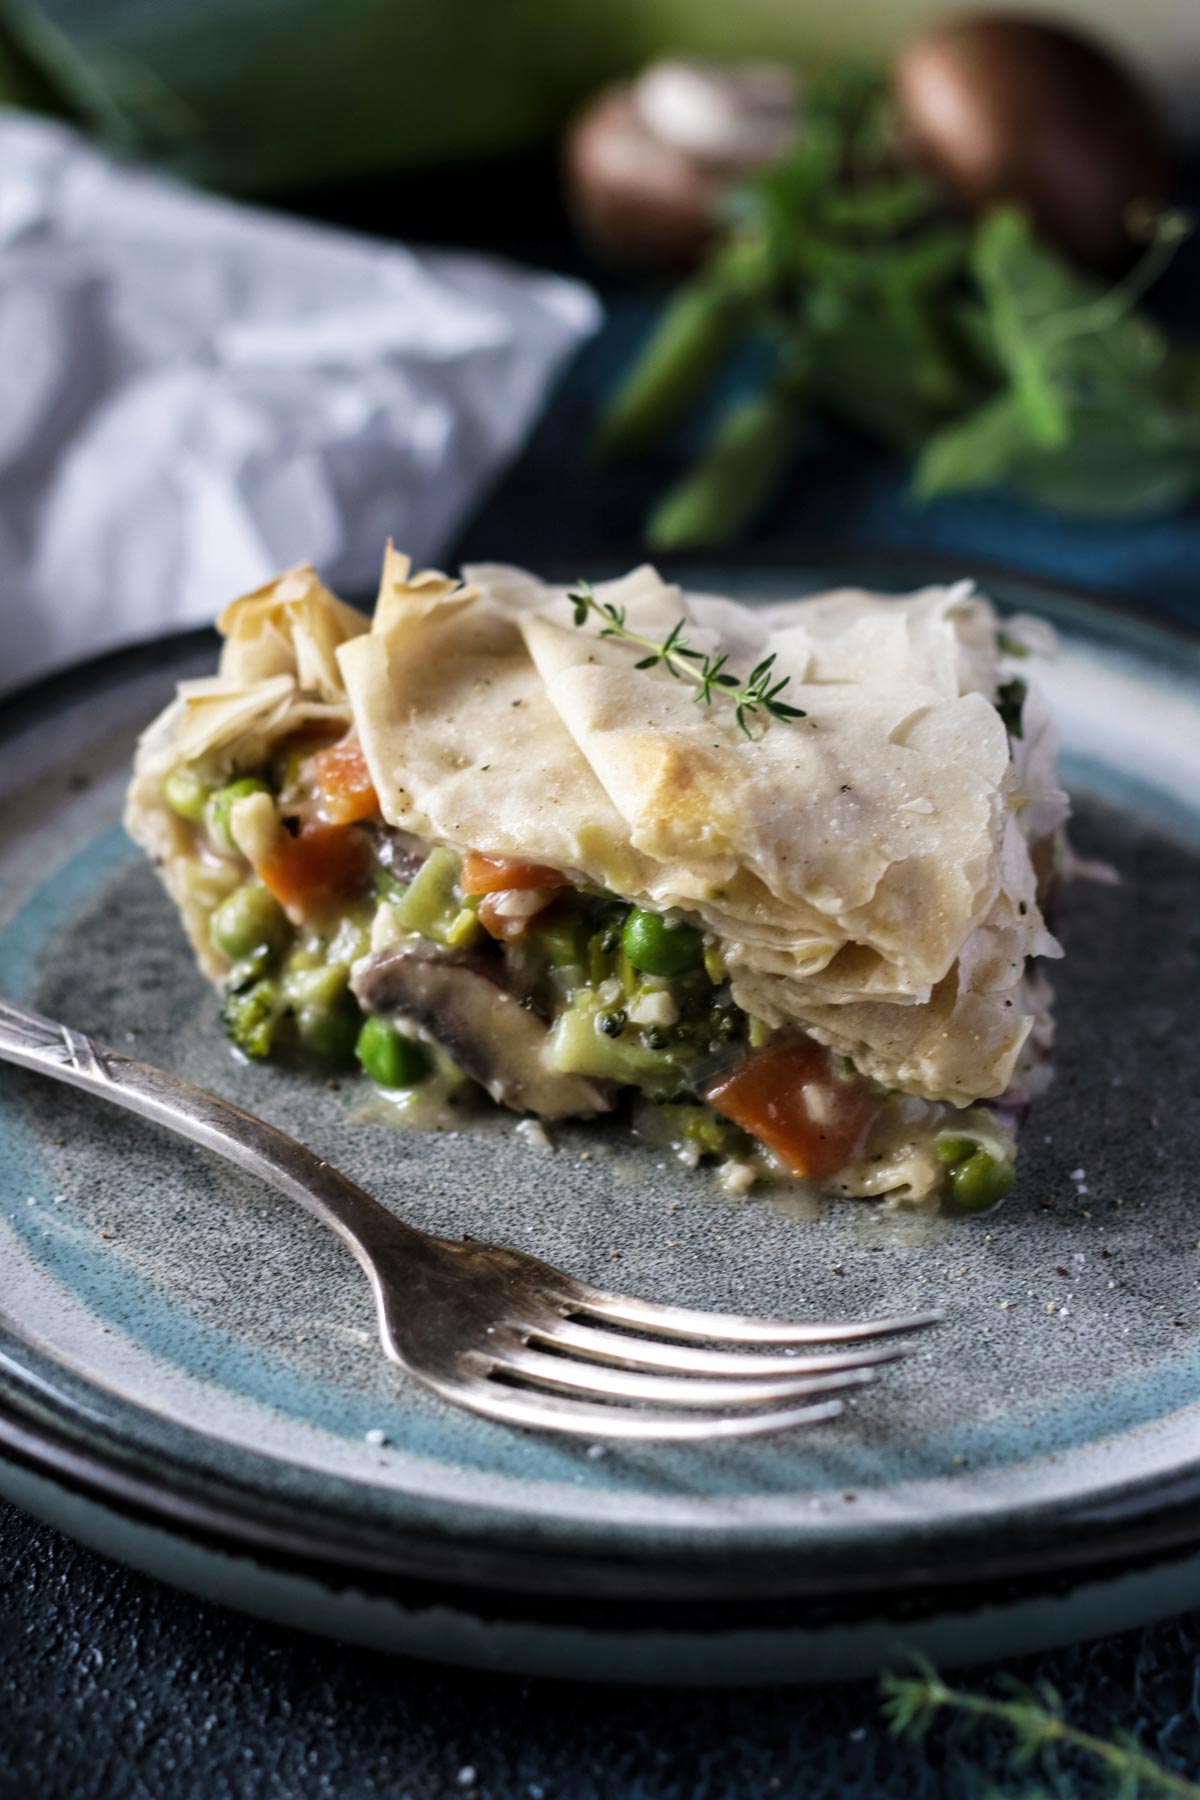 A Slice of Phyllo Pot Pie with vegetables and mushrooms on a grey plate with a fork.